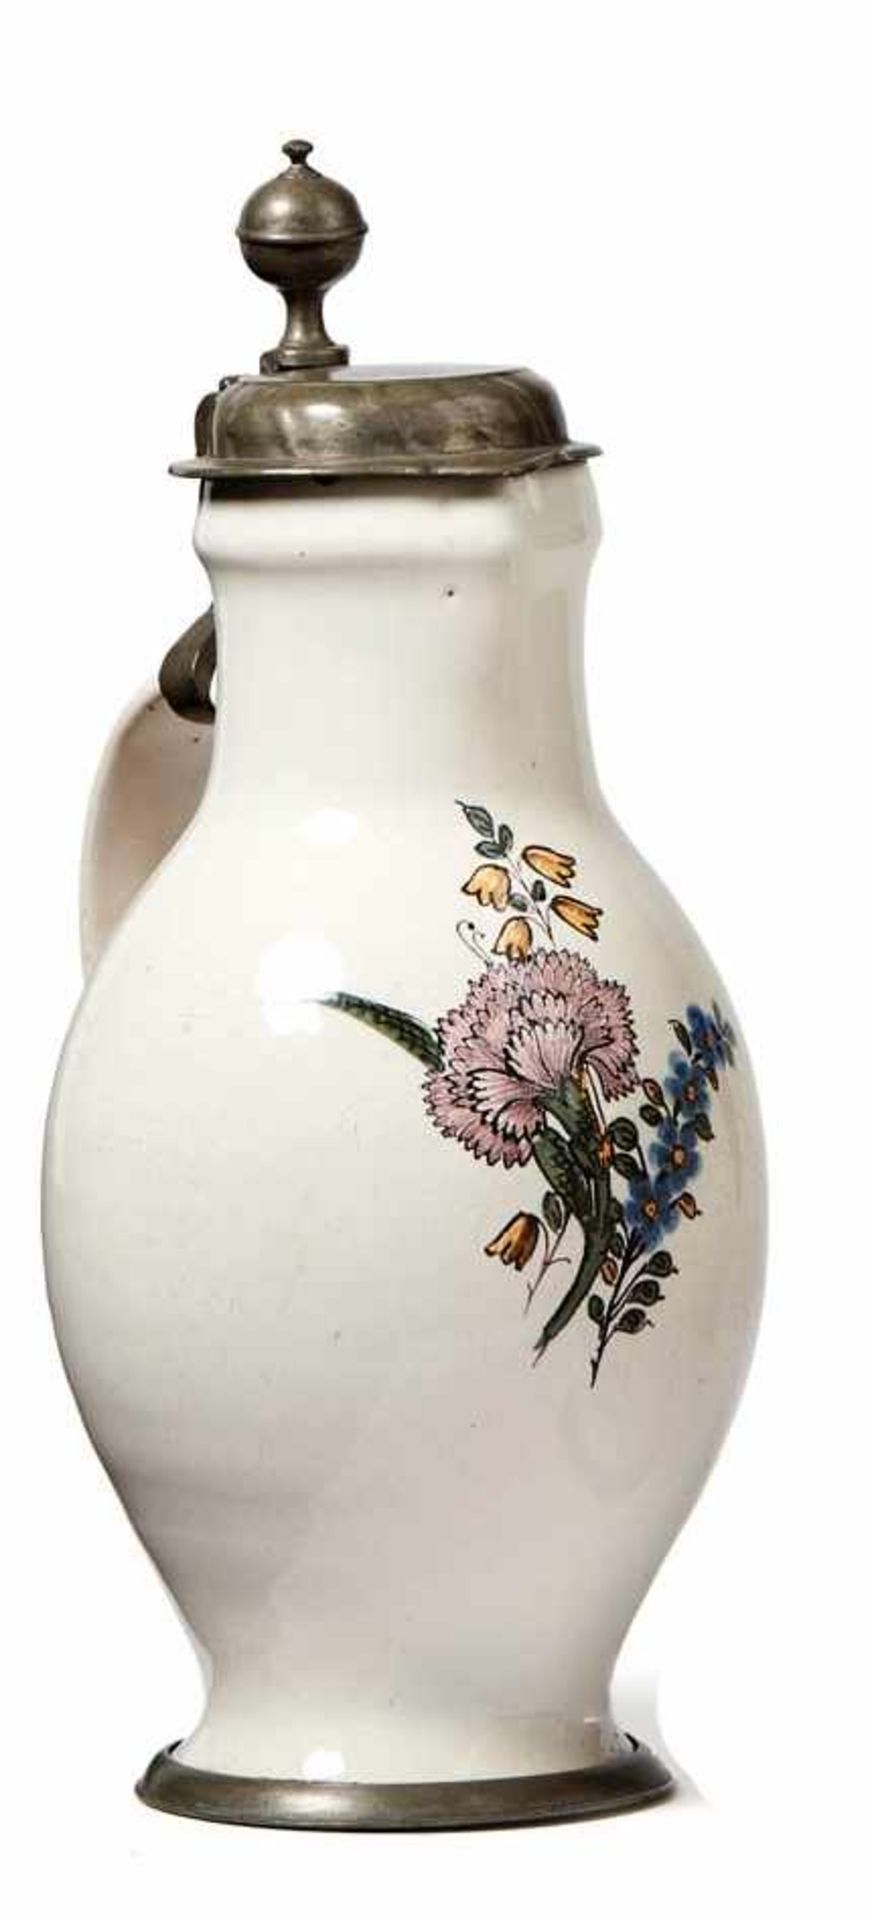 Pear shaped jug with flower decorationSouthern Germany, probably Bayreuth, 18th c.On the front